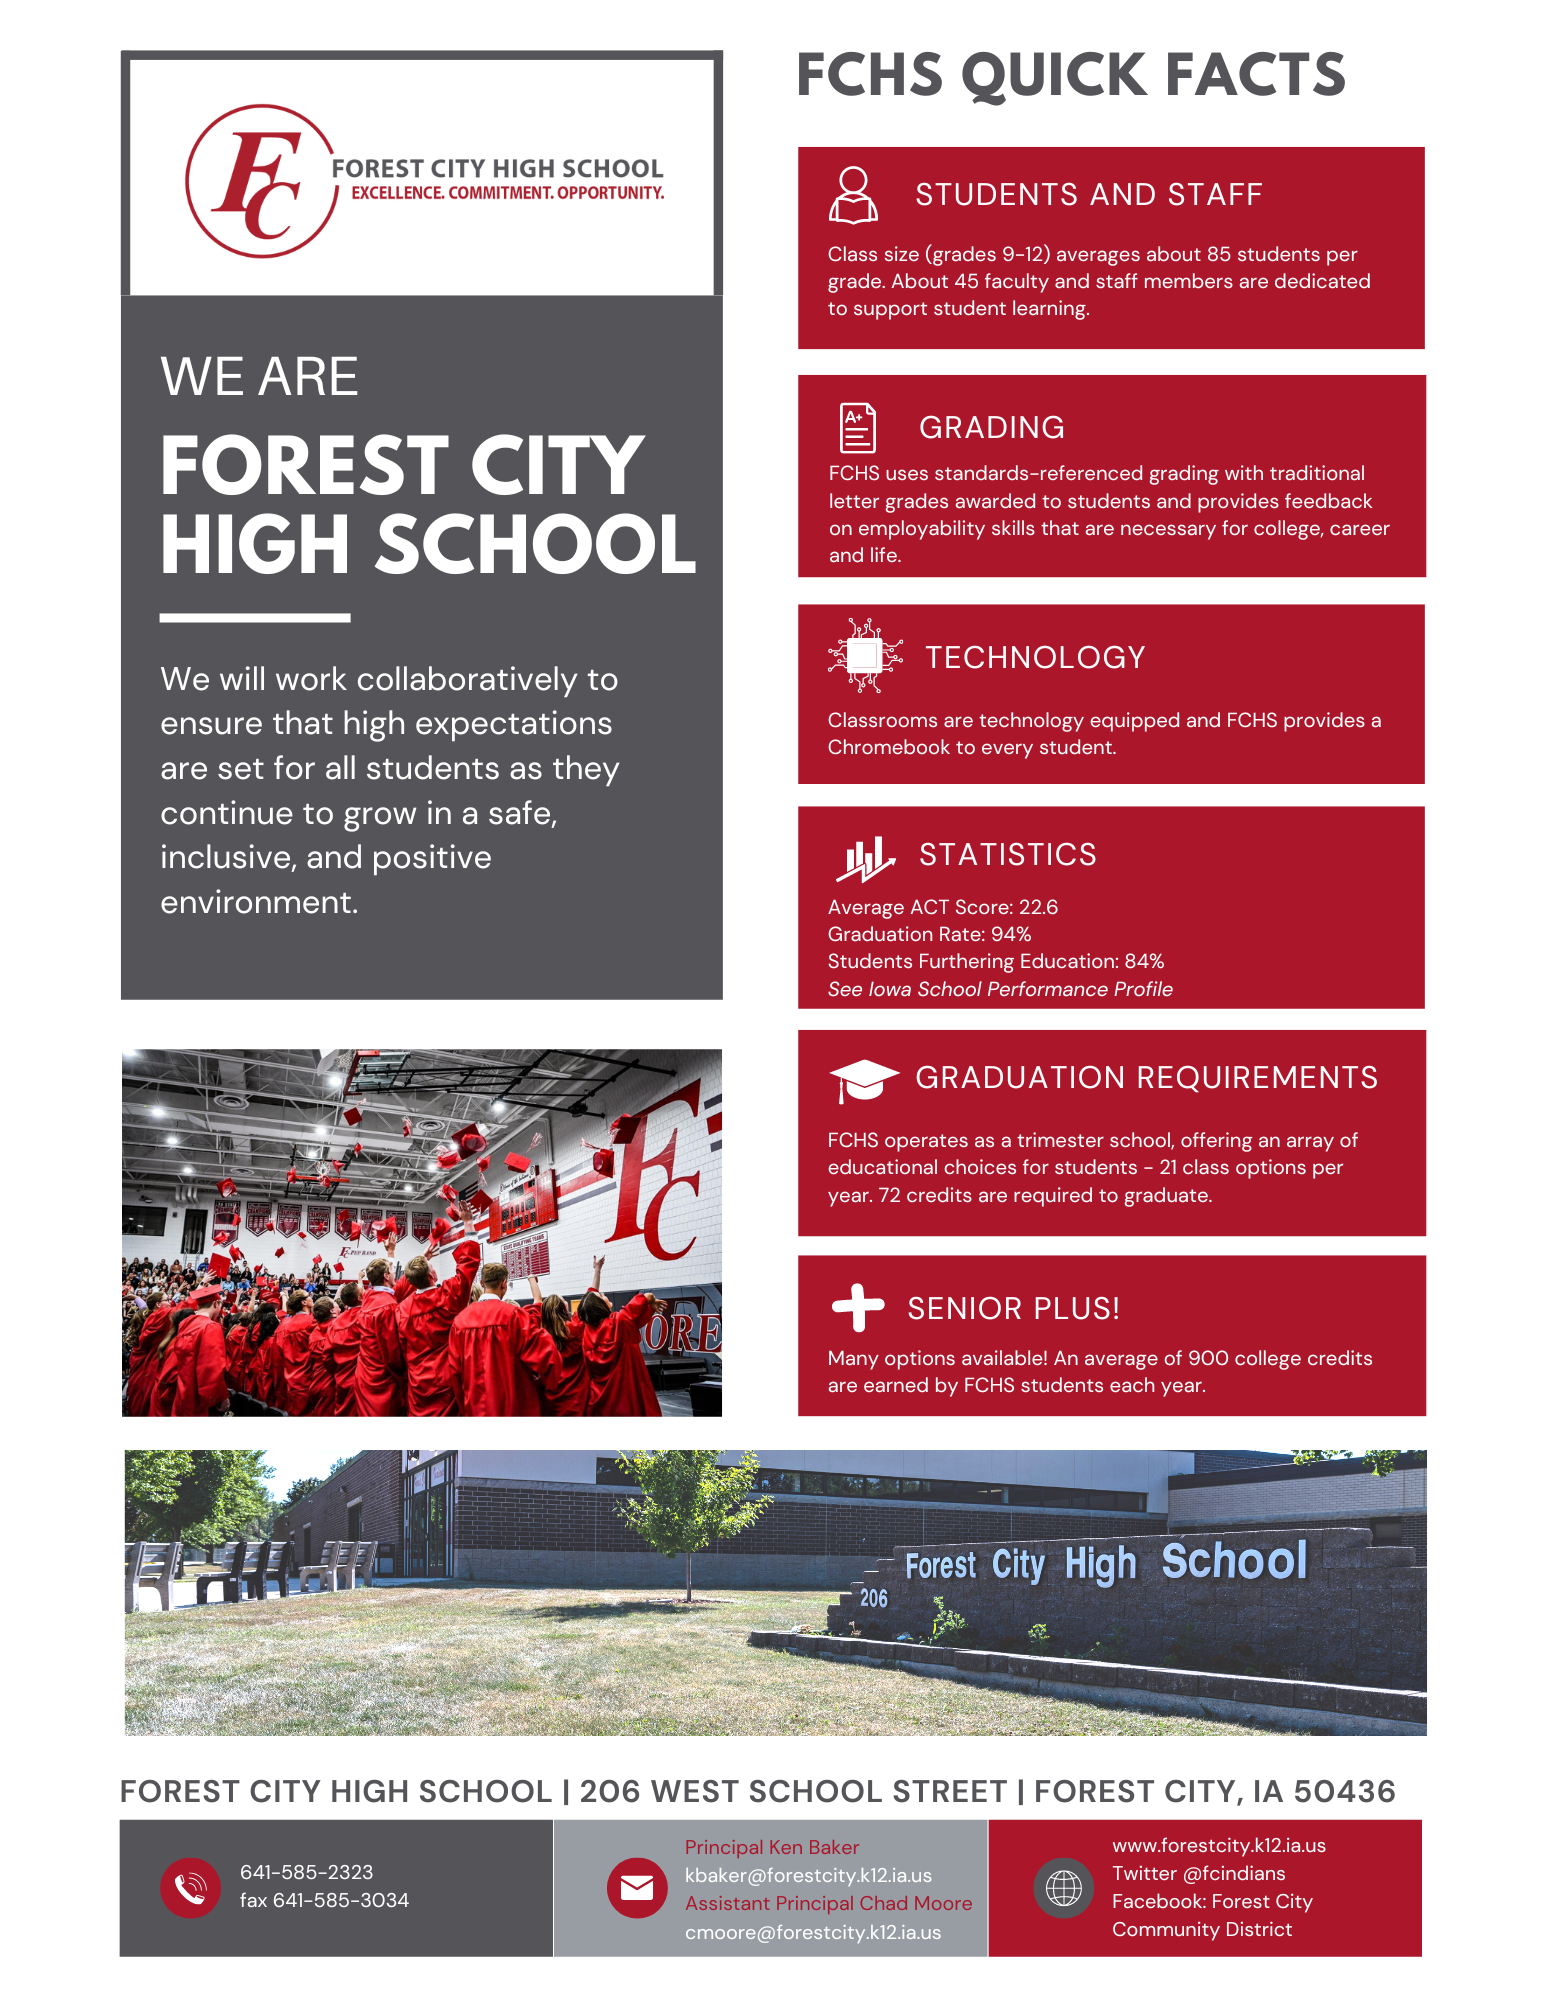 FCHS Overview 1